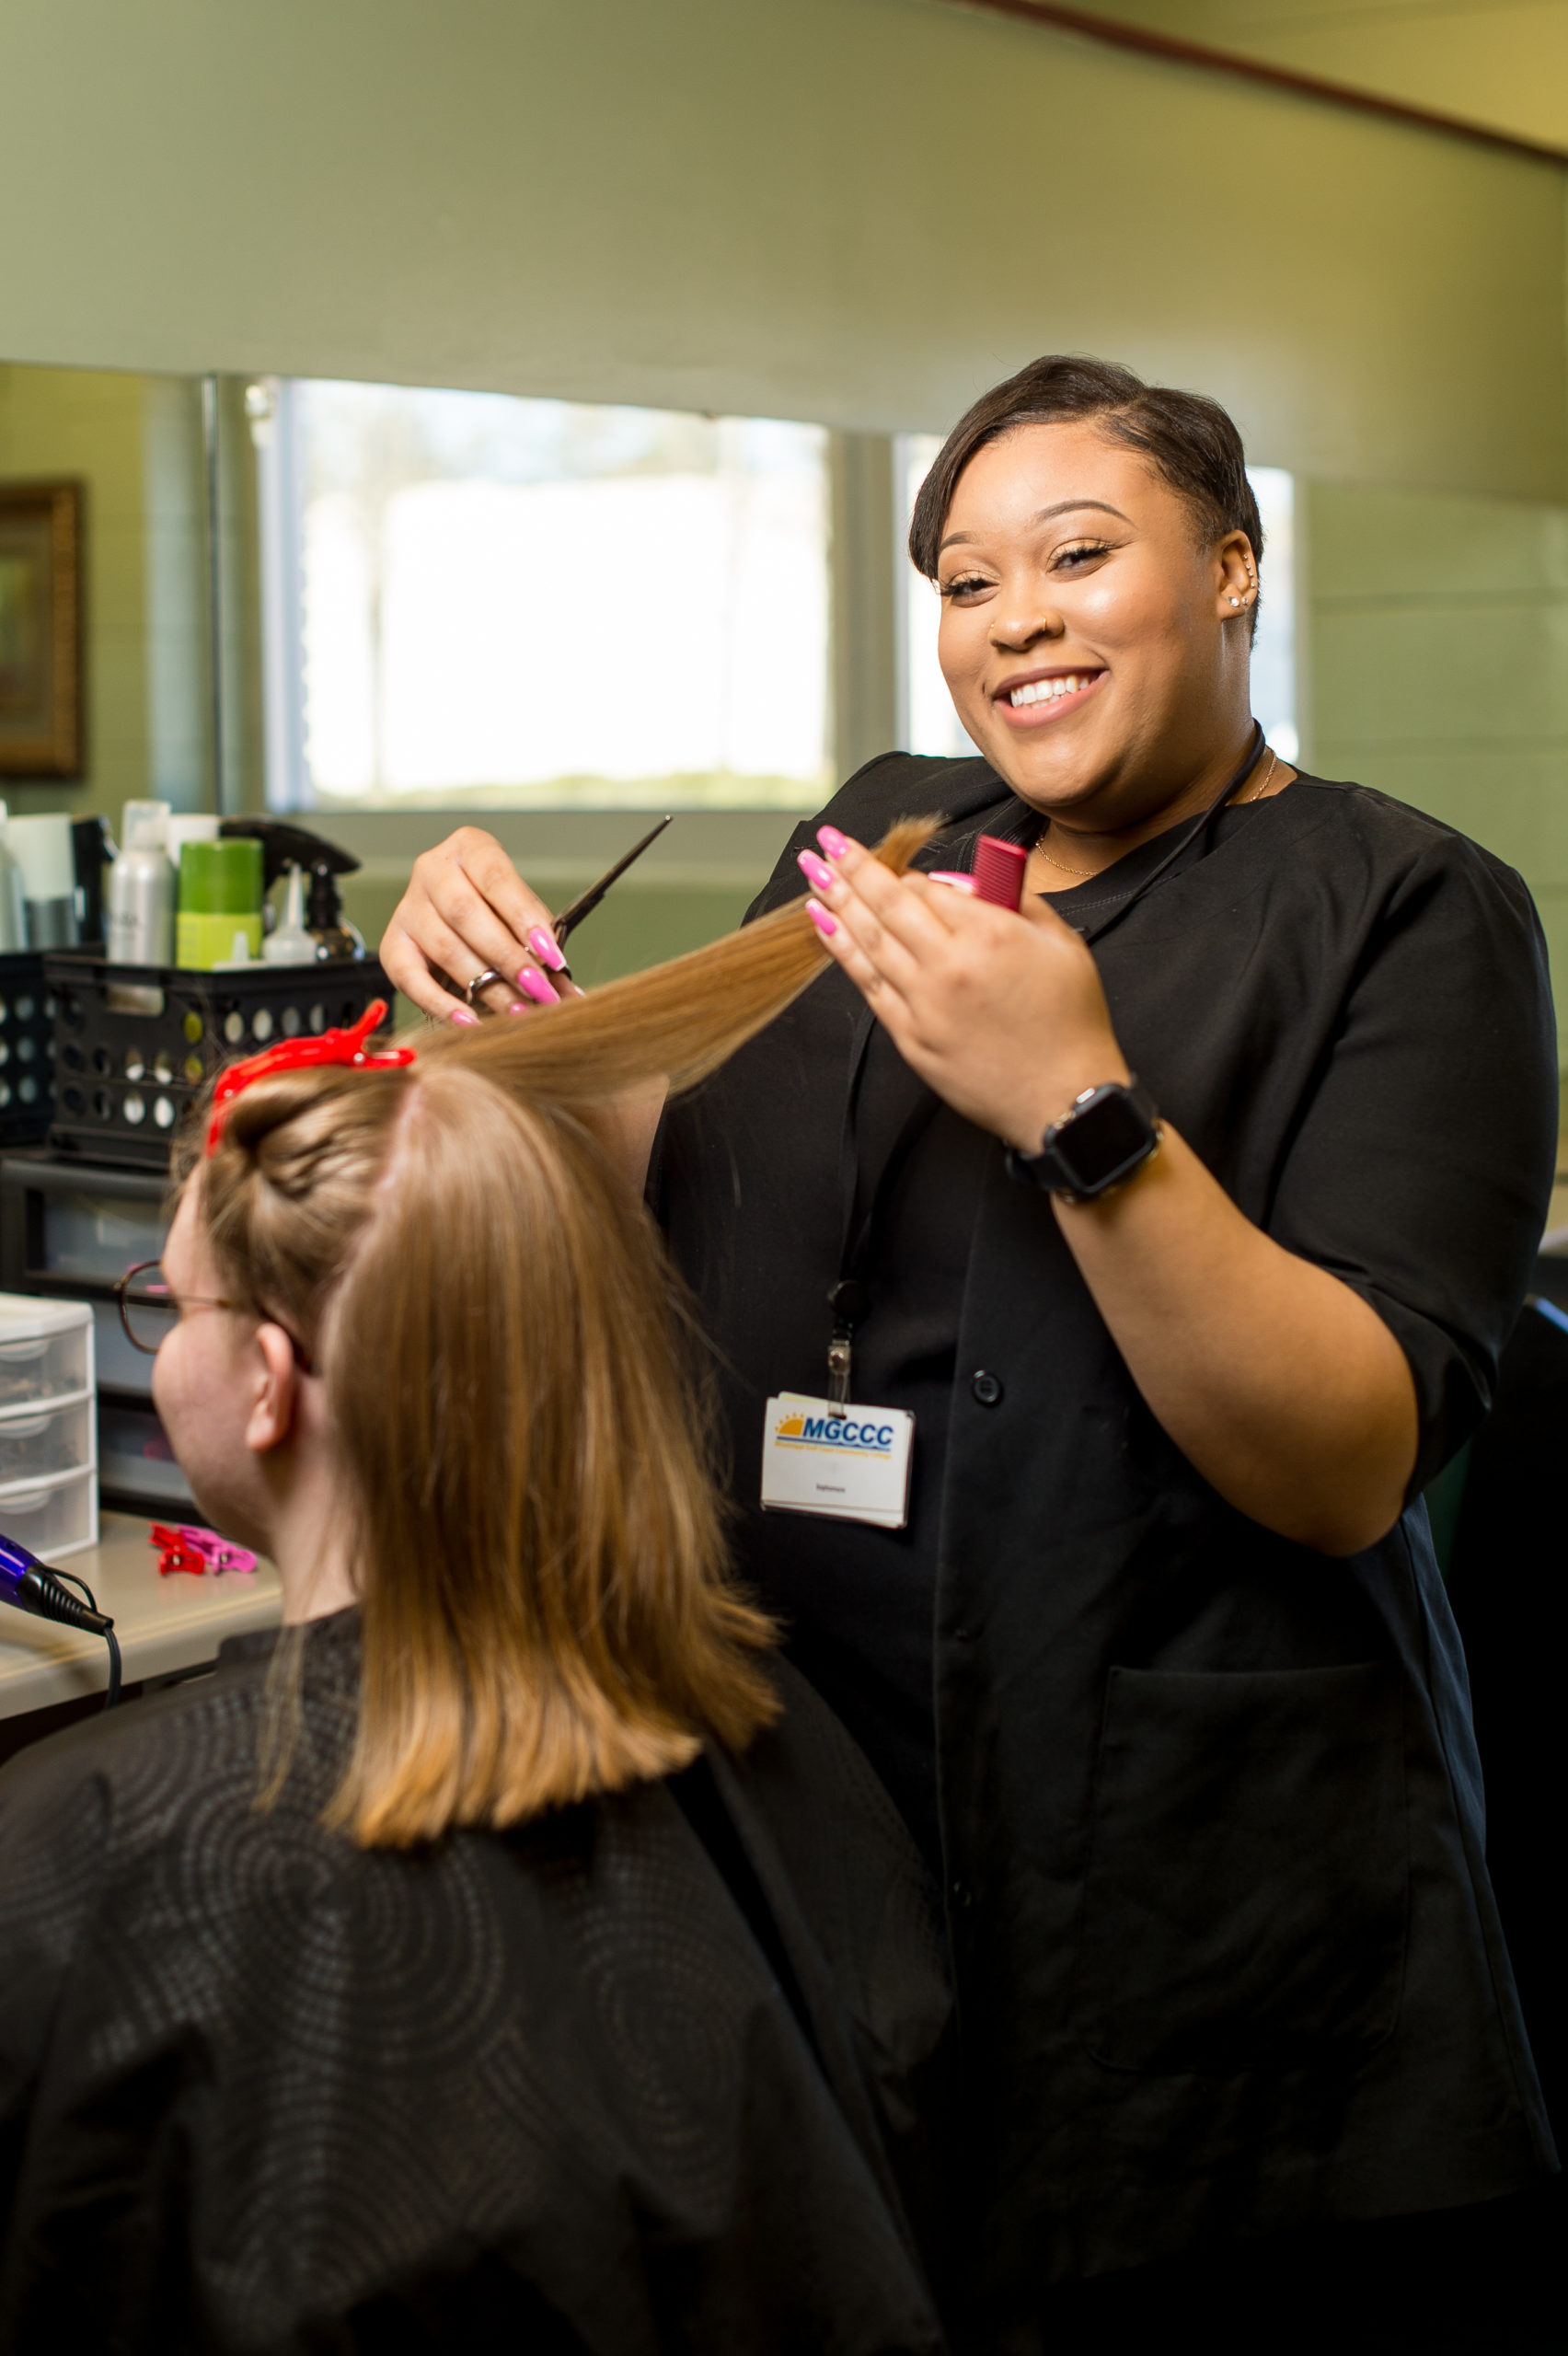 Cosmetology student cutting hair at MGCCC's George County Center